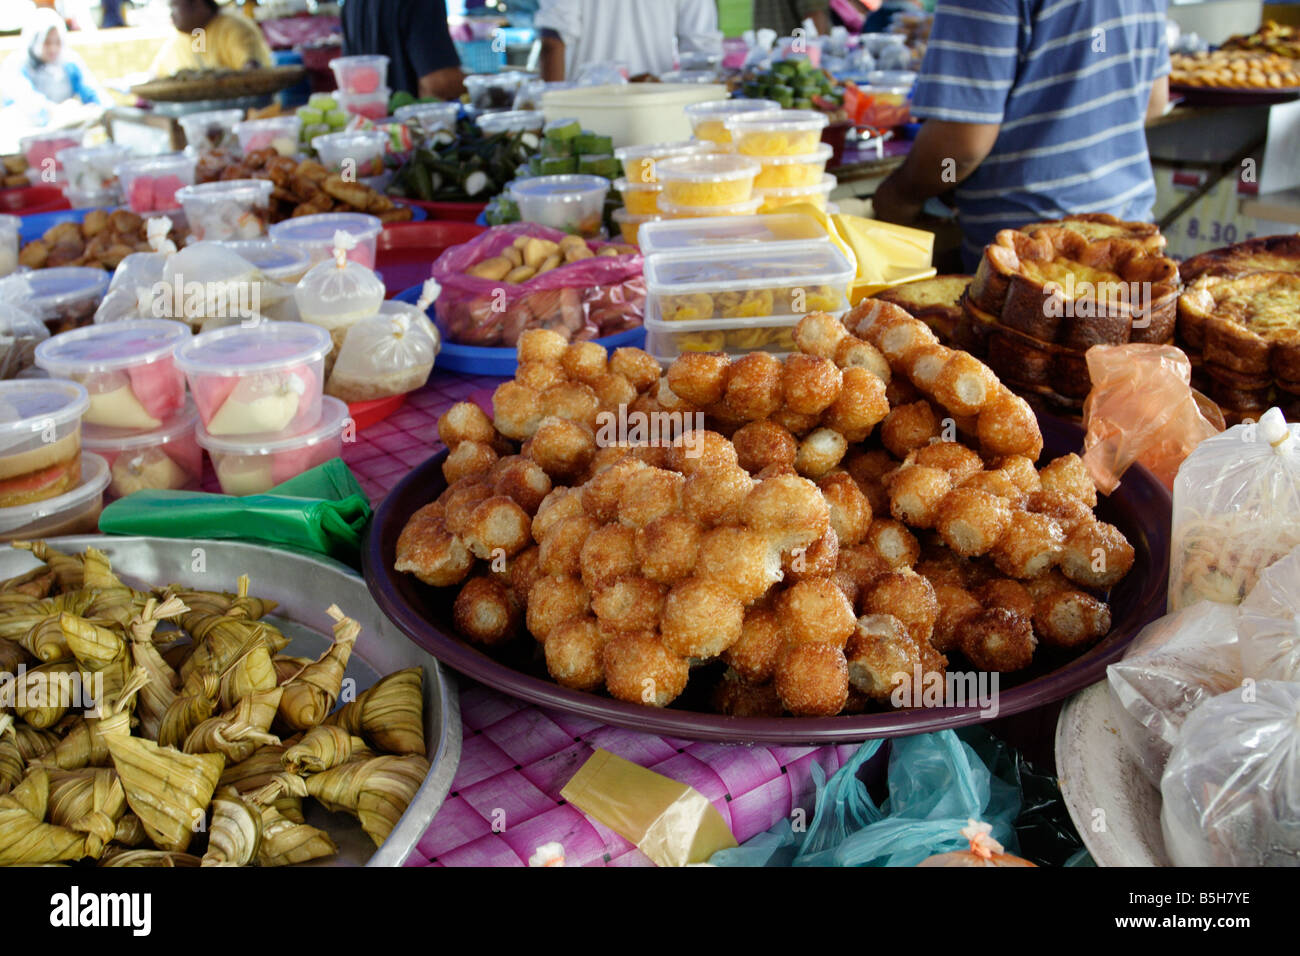 Traditional Malay food at a market during the month of Ramadan in Terengganu, Malaysia. Stock Photo